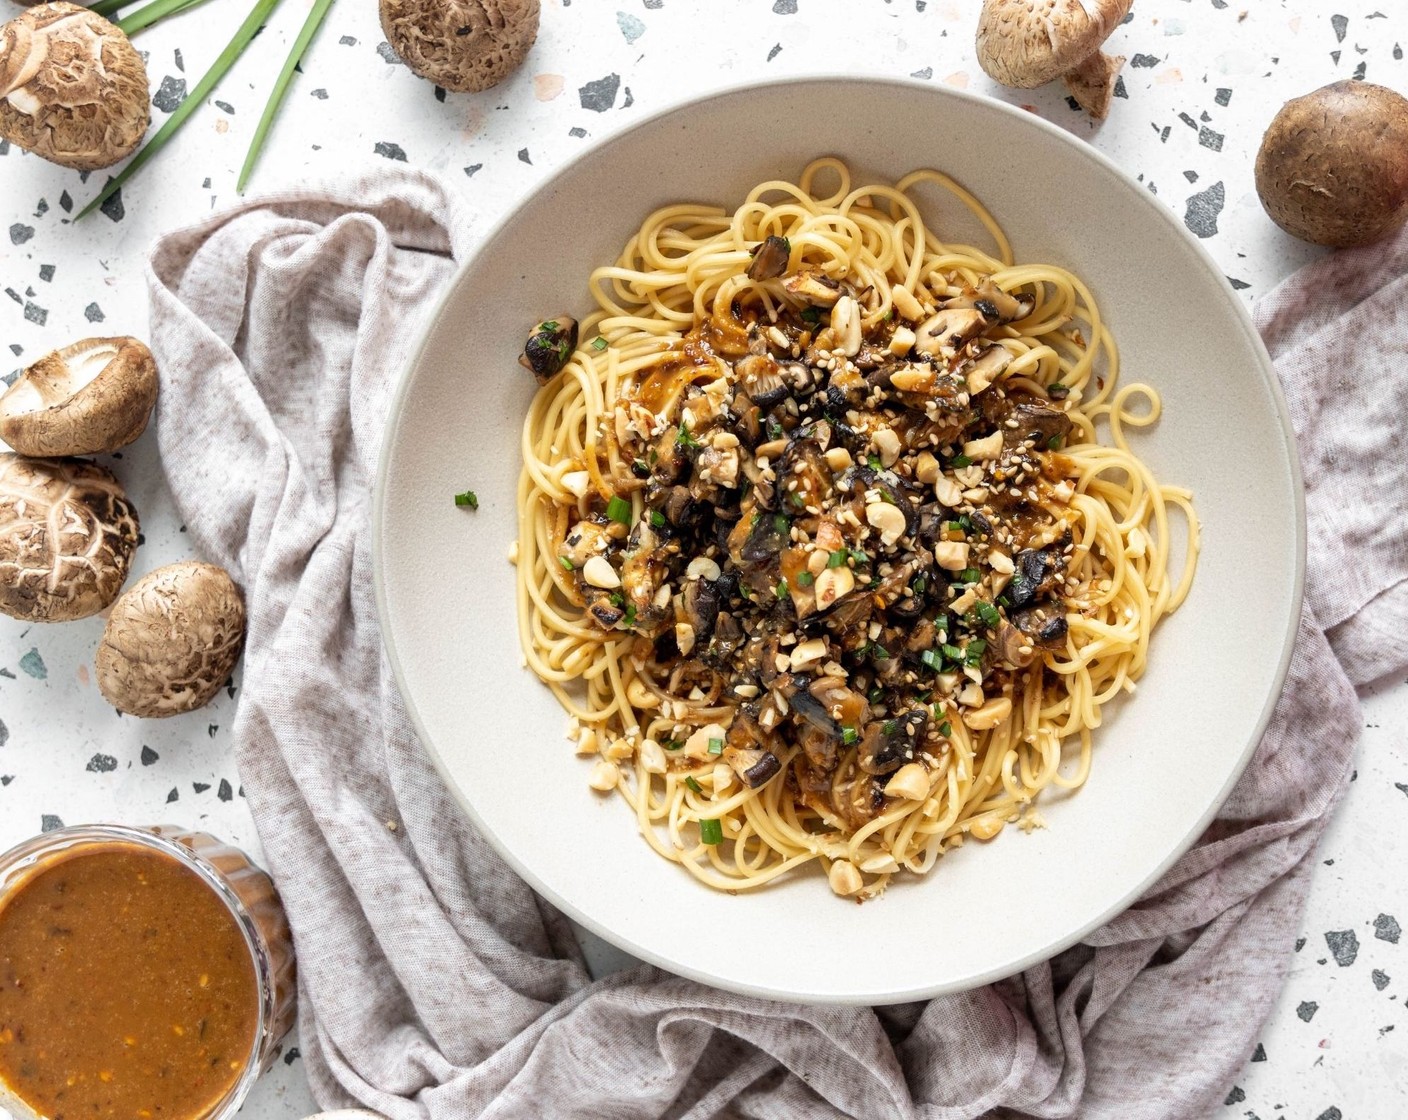 step 7 Divide the noodles into your bowls and top with sauce and mushrooms mixture. Garnish with Dry Roasted Peanuts (1 cup) and Roasted White Sesame Seeds (to taste) and serve. You can enjoy these noodles warm or cold!